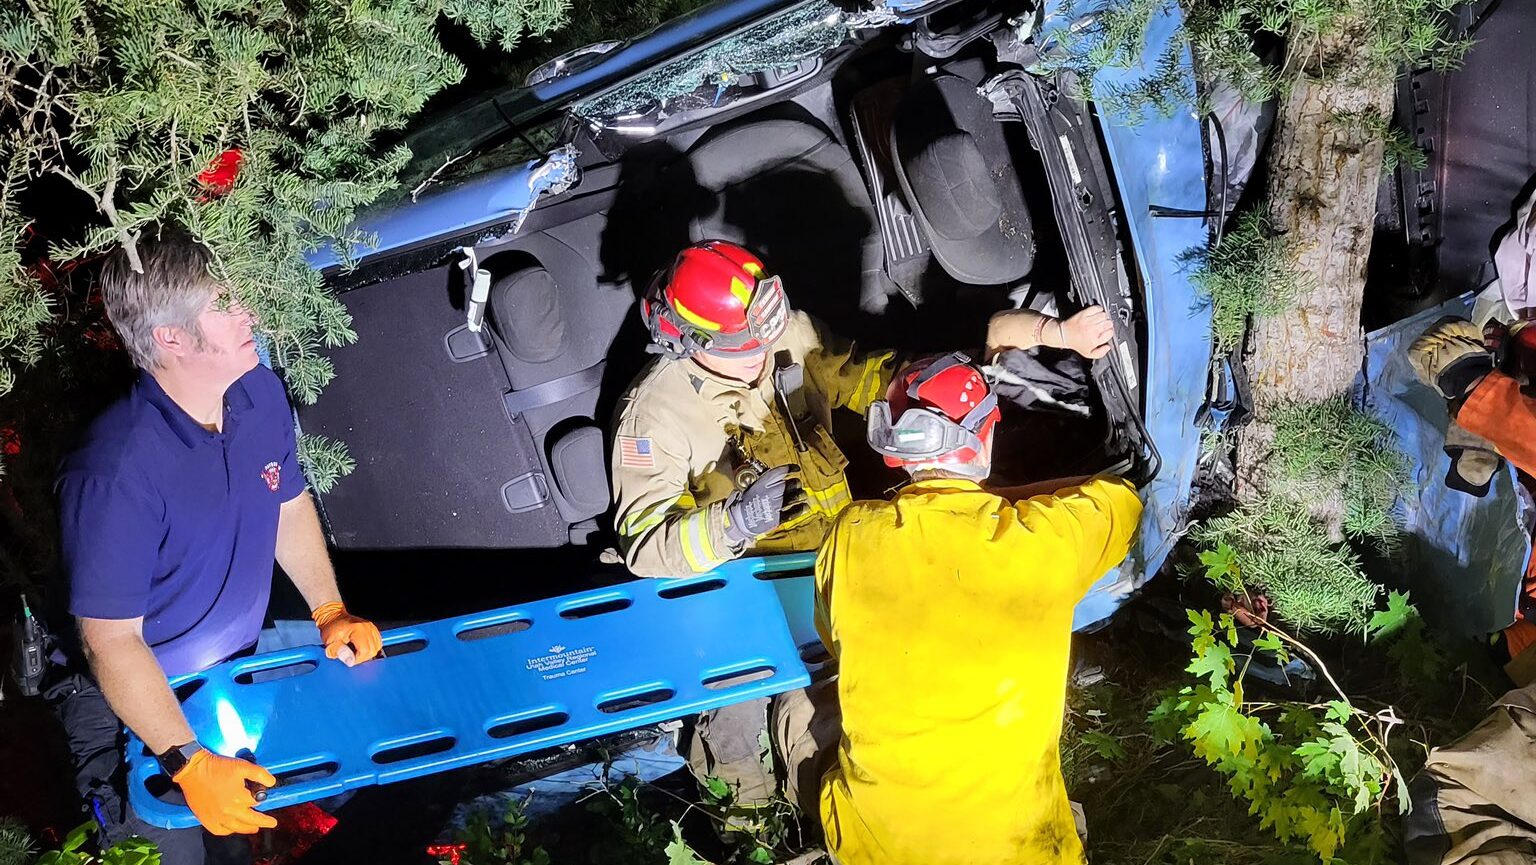 PAYSON, Utah -- A group of teens is recovering after driving 100 feet off the road in Payson Canyon...